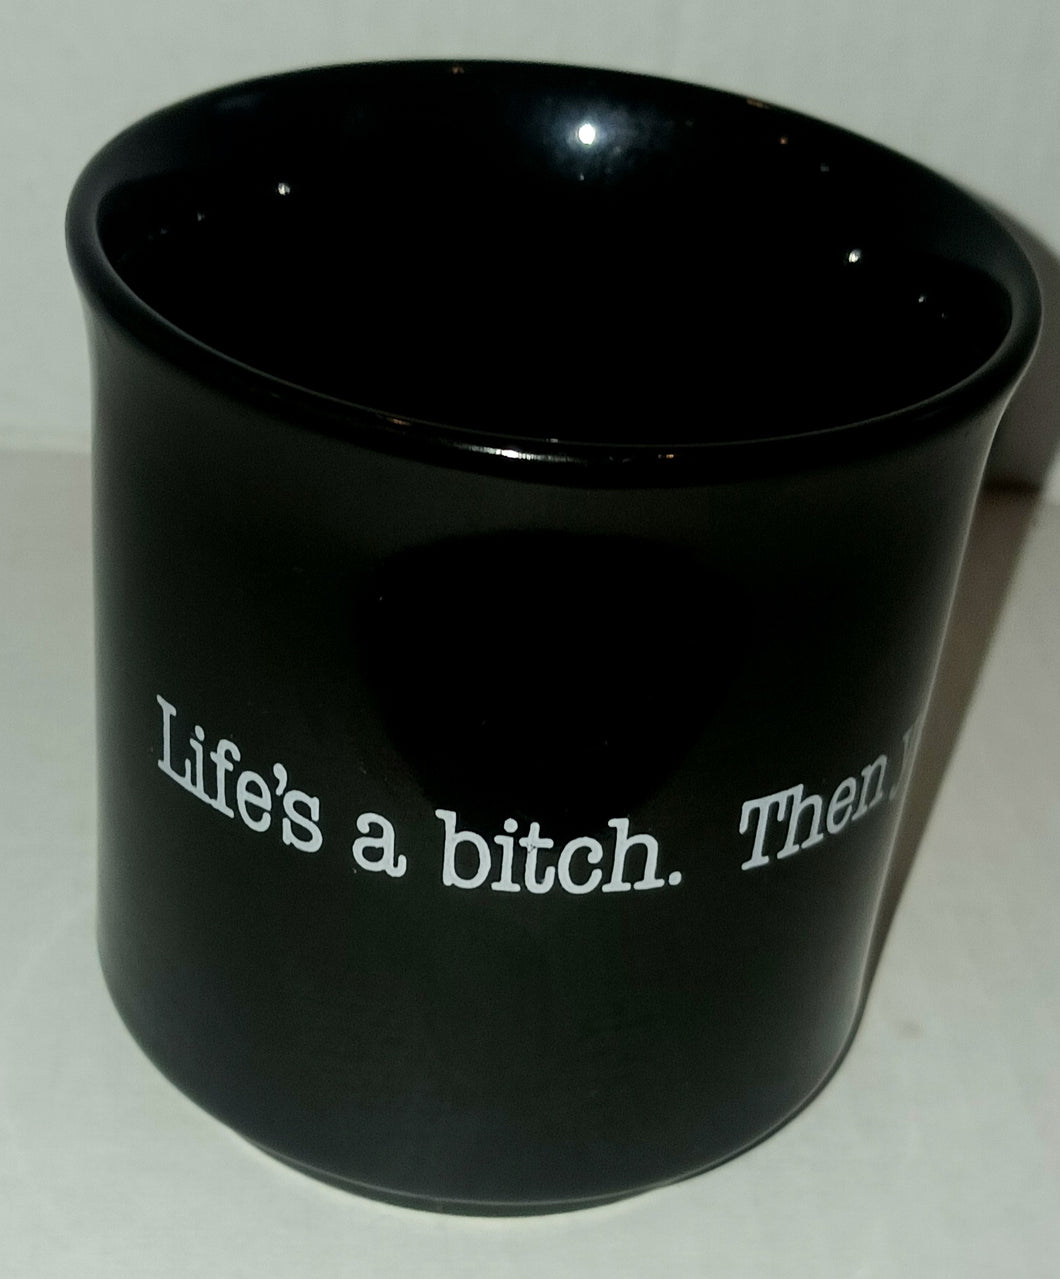 Recycled Paper Products Life's A Bitch Humor Ceramic Black Coffee Mug Cup Japan